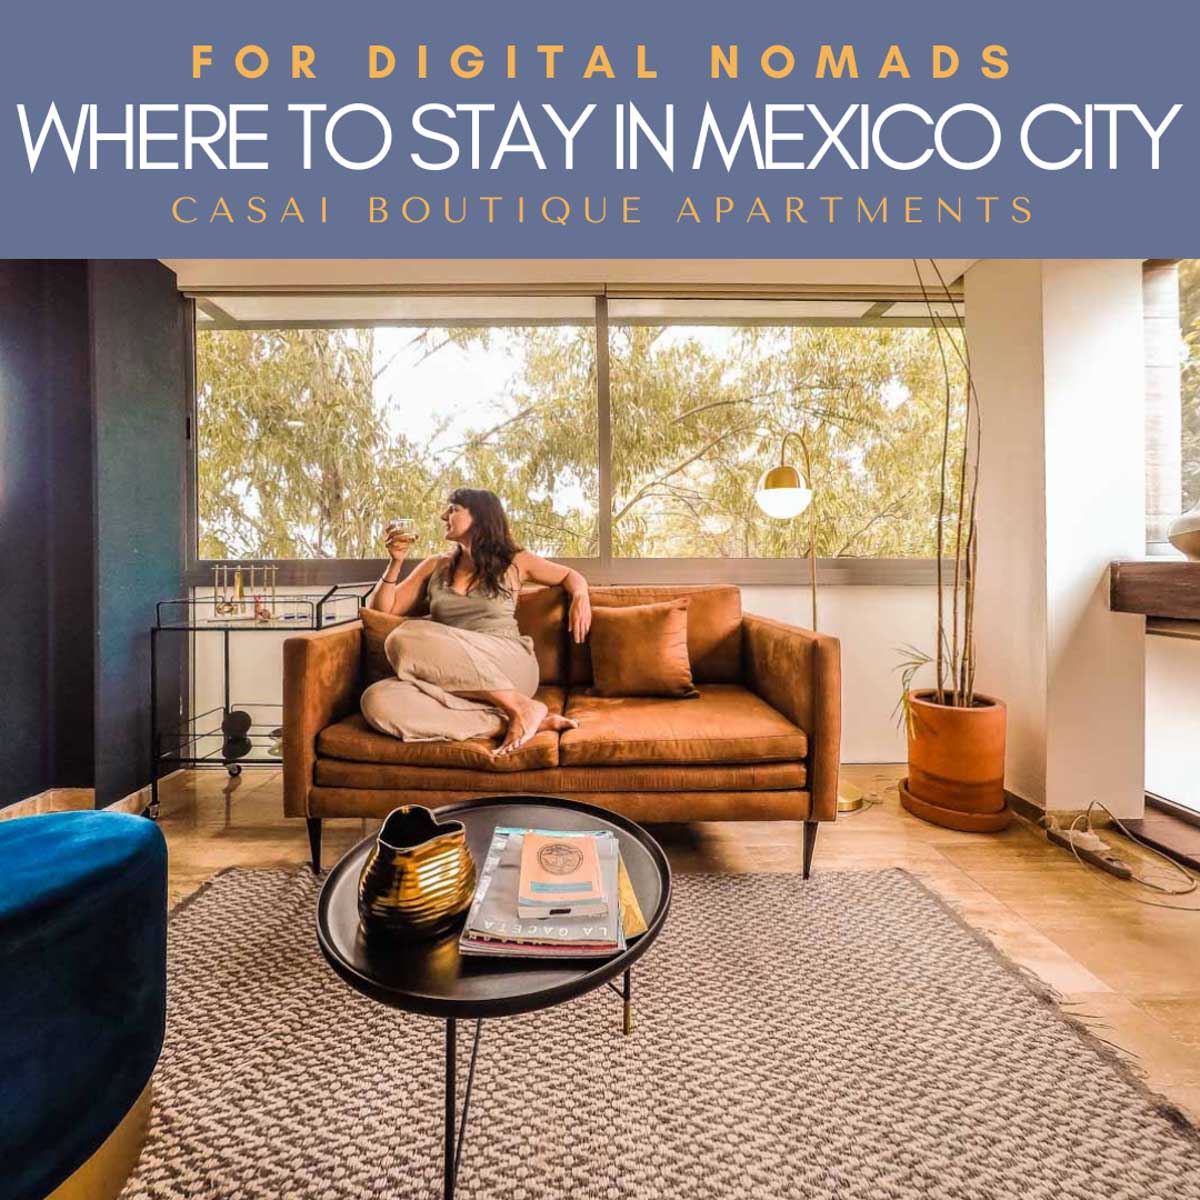 Copy of where to stay in mexico city for digital nomads casai ap